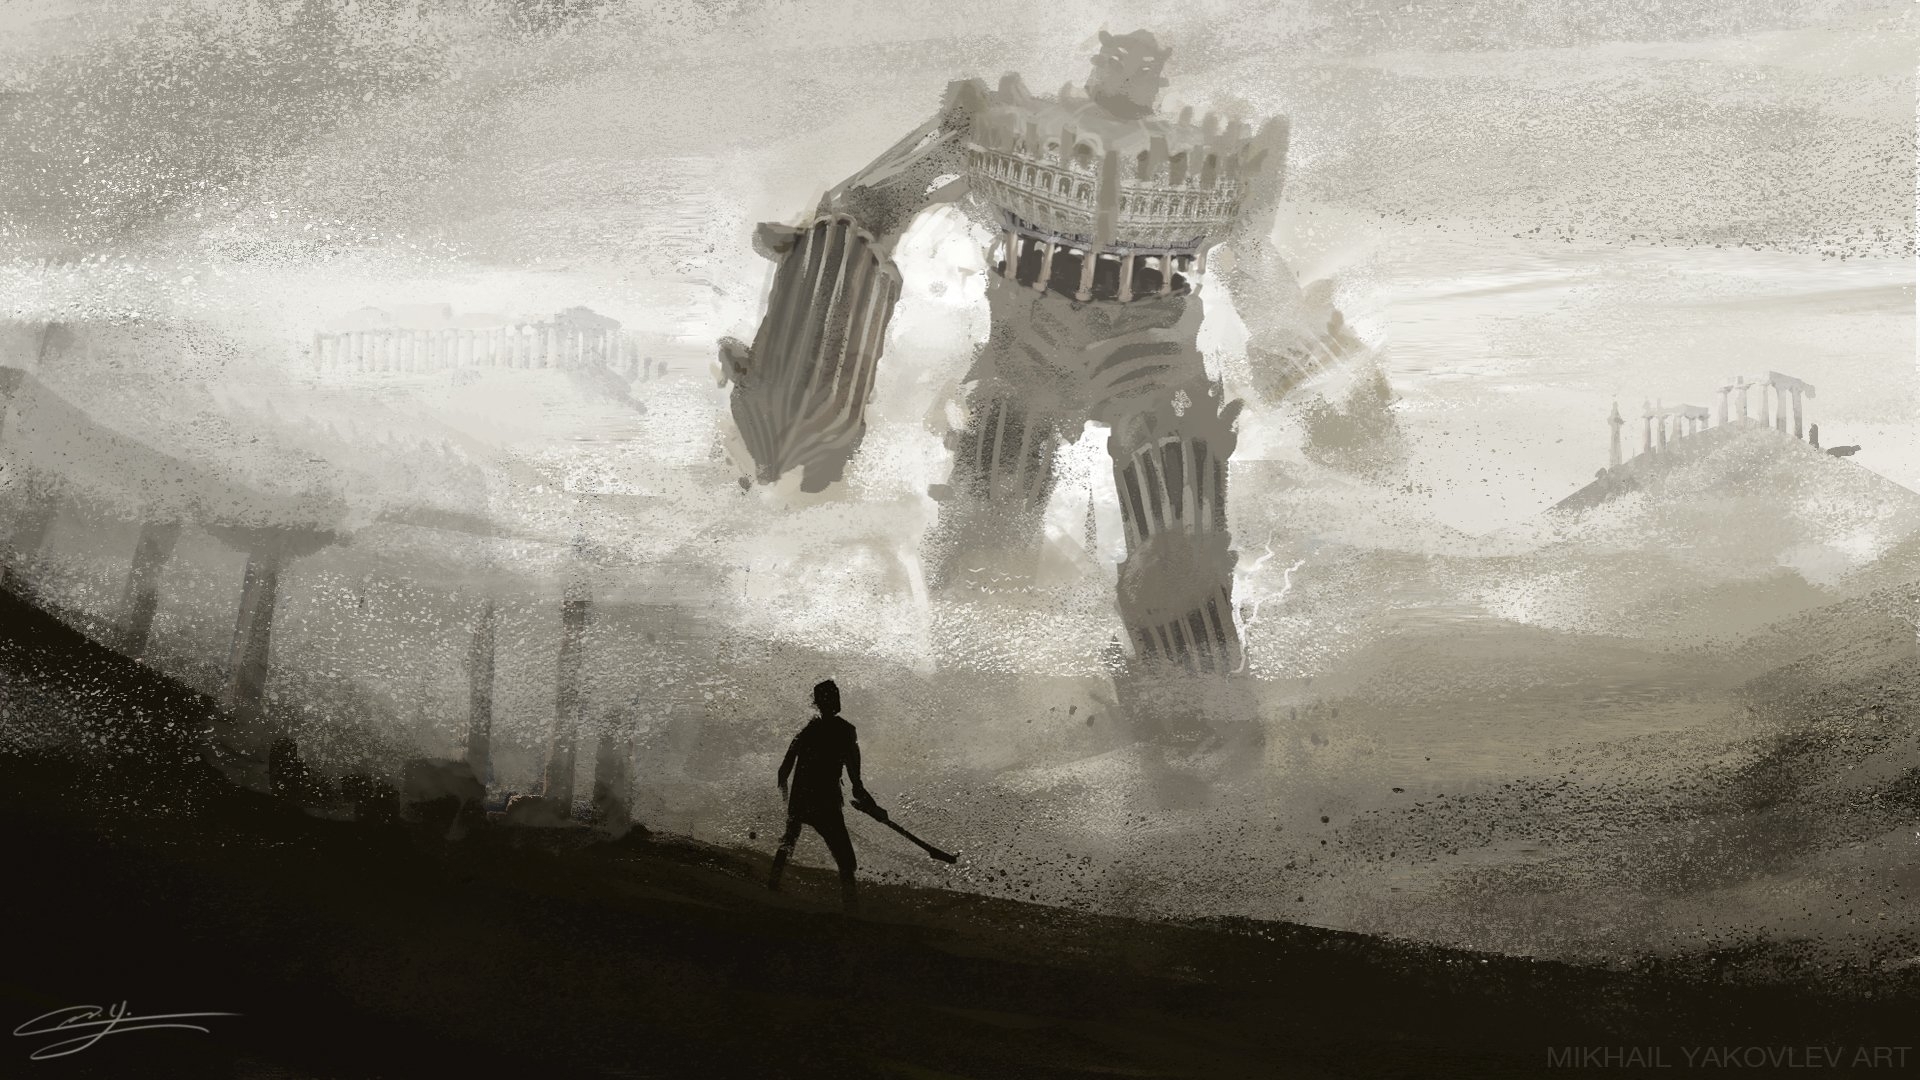 shadow of the colossus pc crack